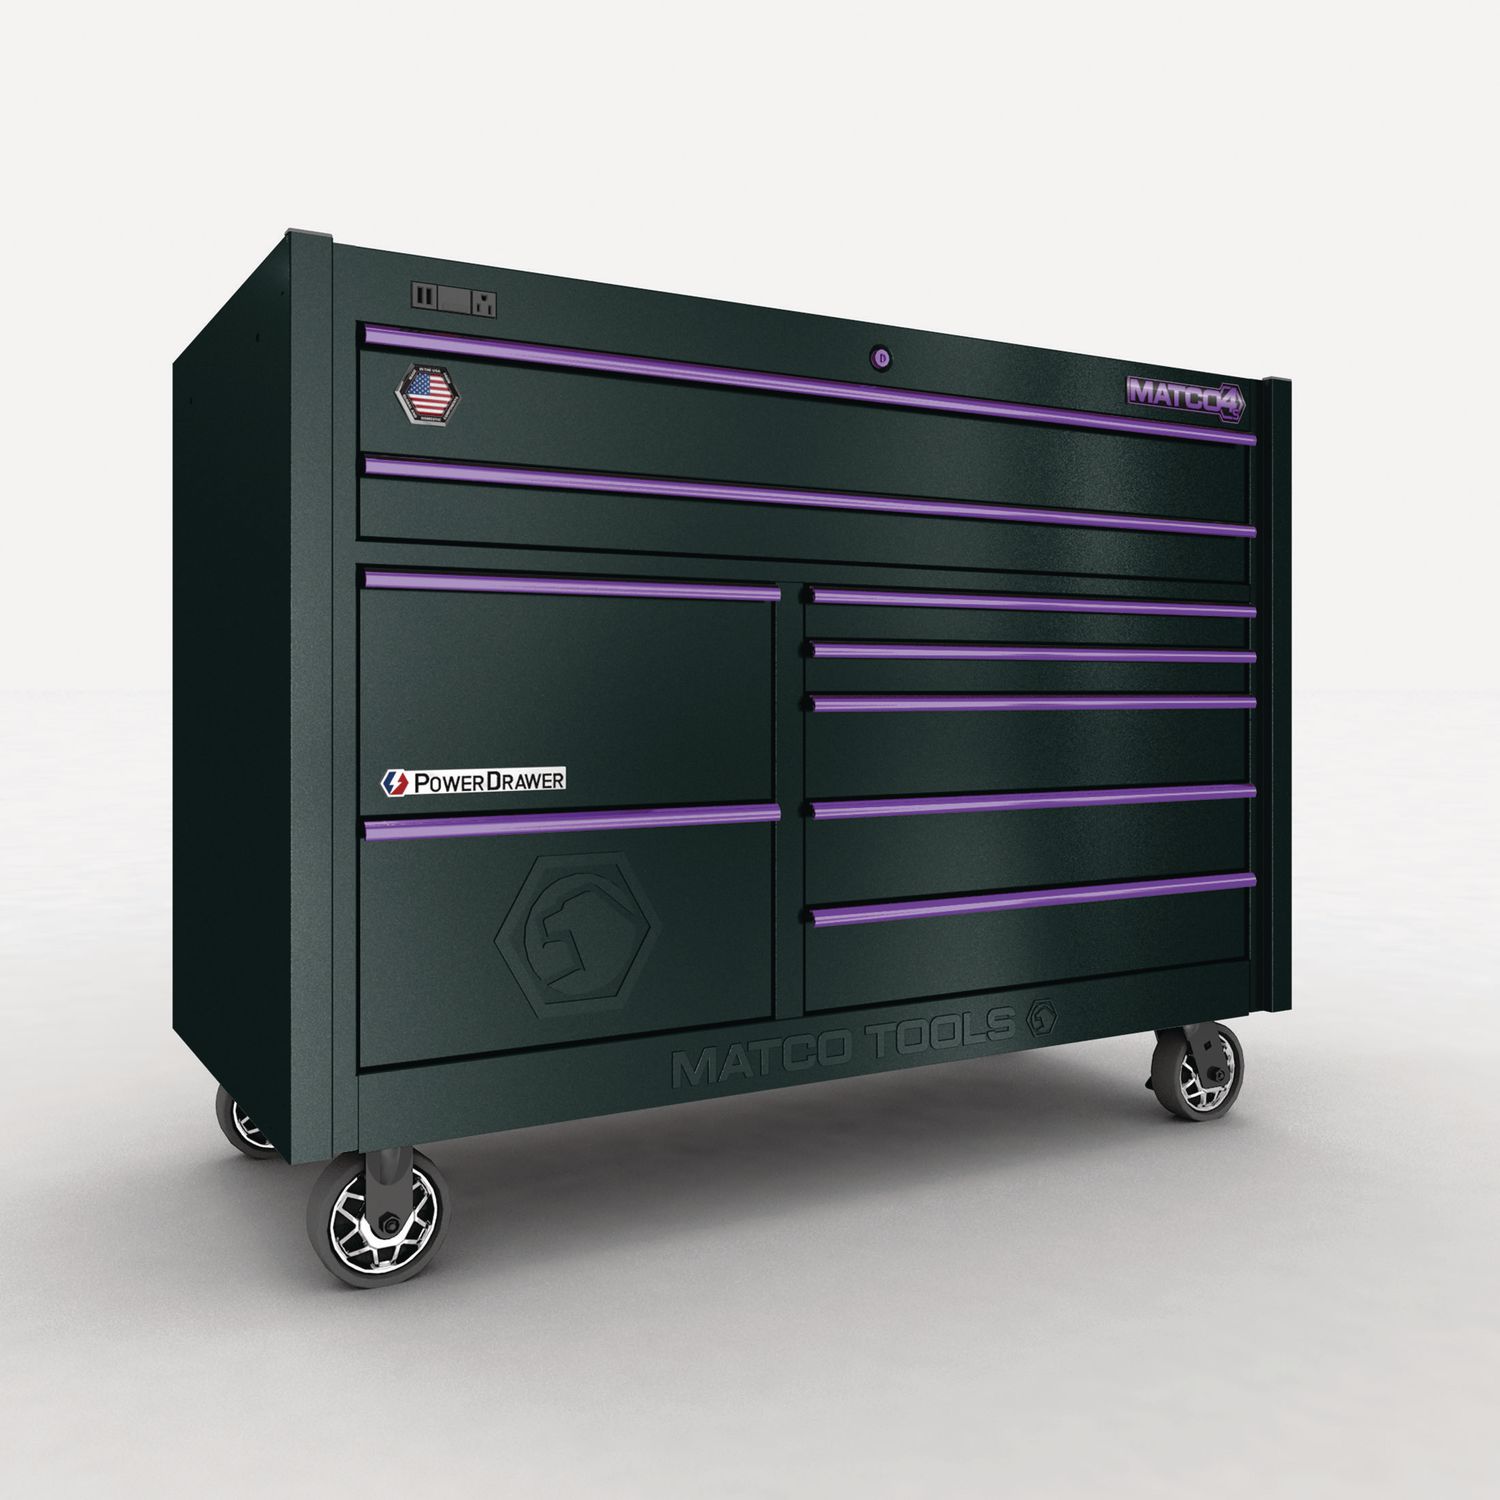 Matco Tools - Ready for more Purple?? Check out this sleek purple trim on  the 6s boxes on this #toolstoragetuesday